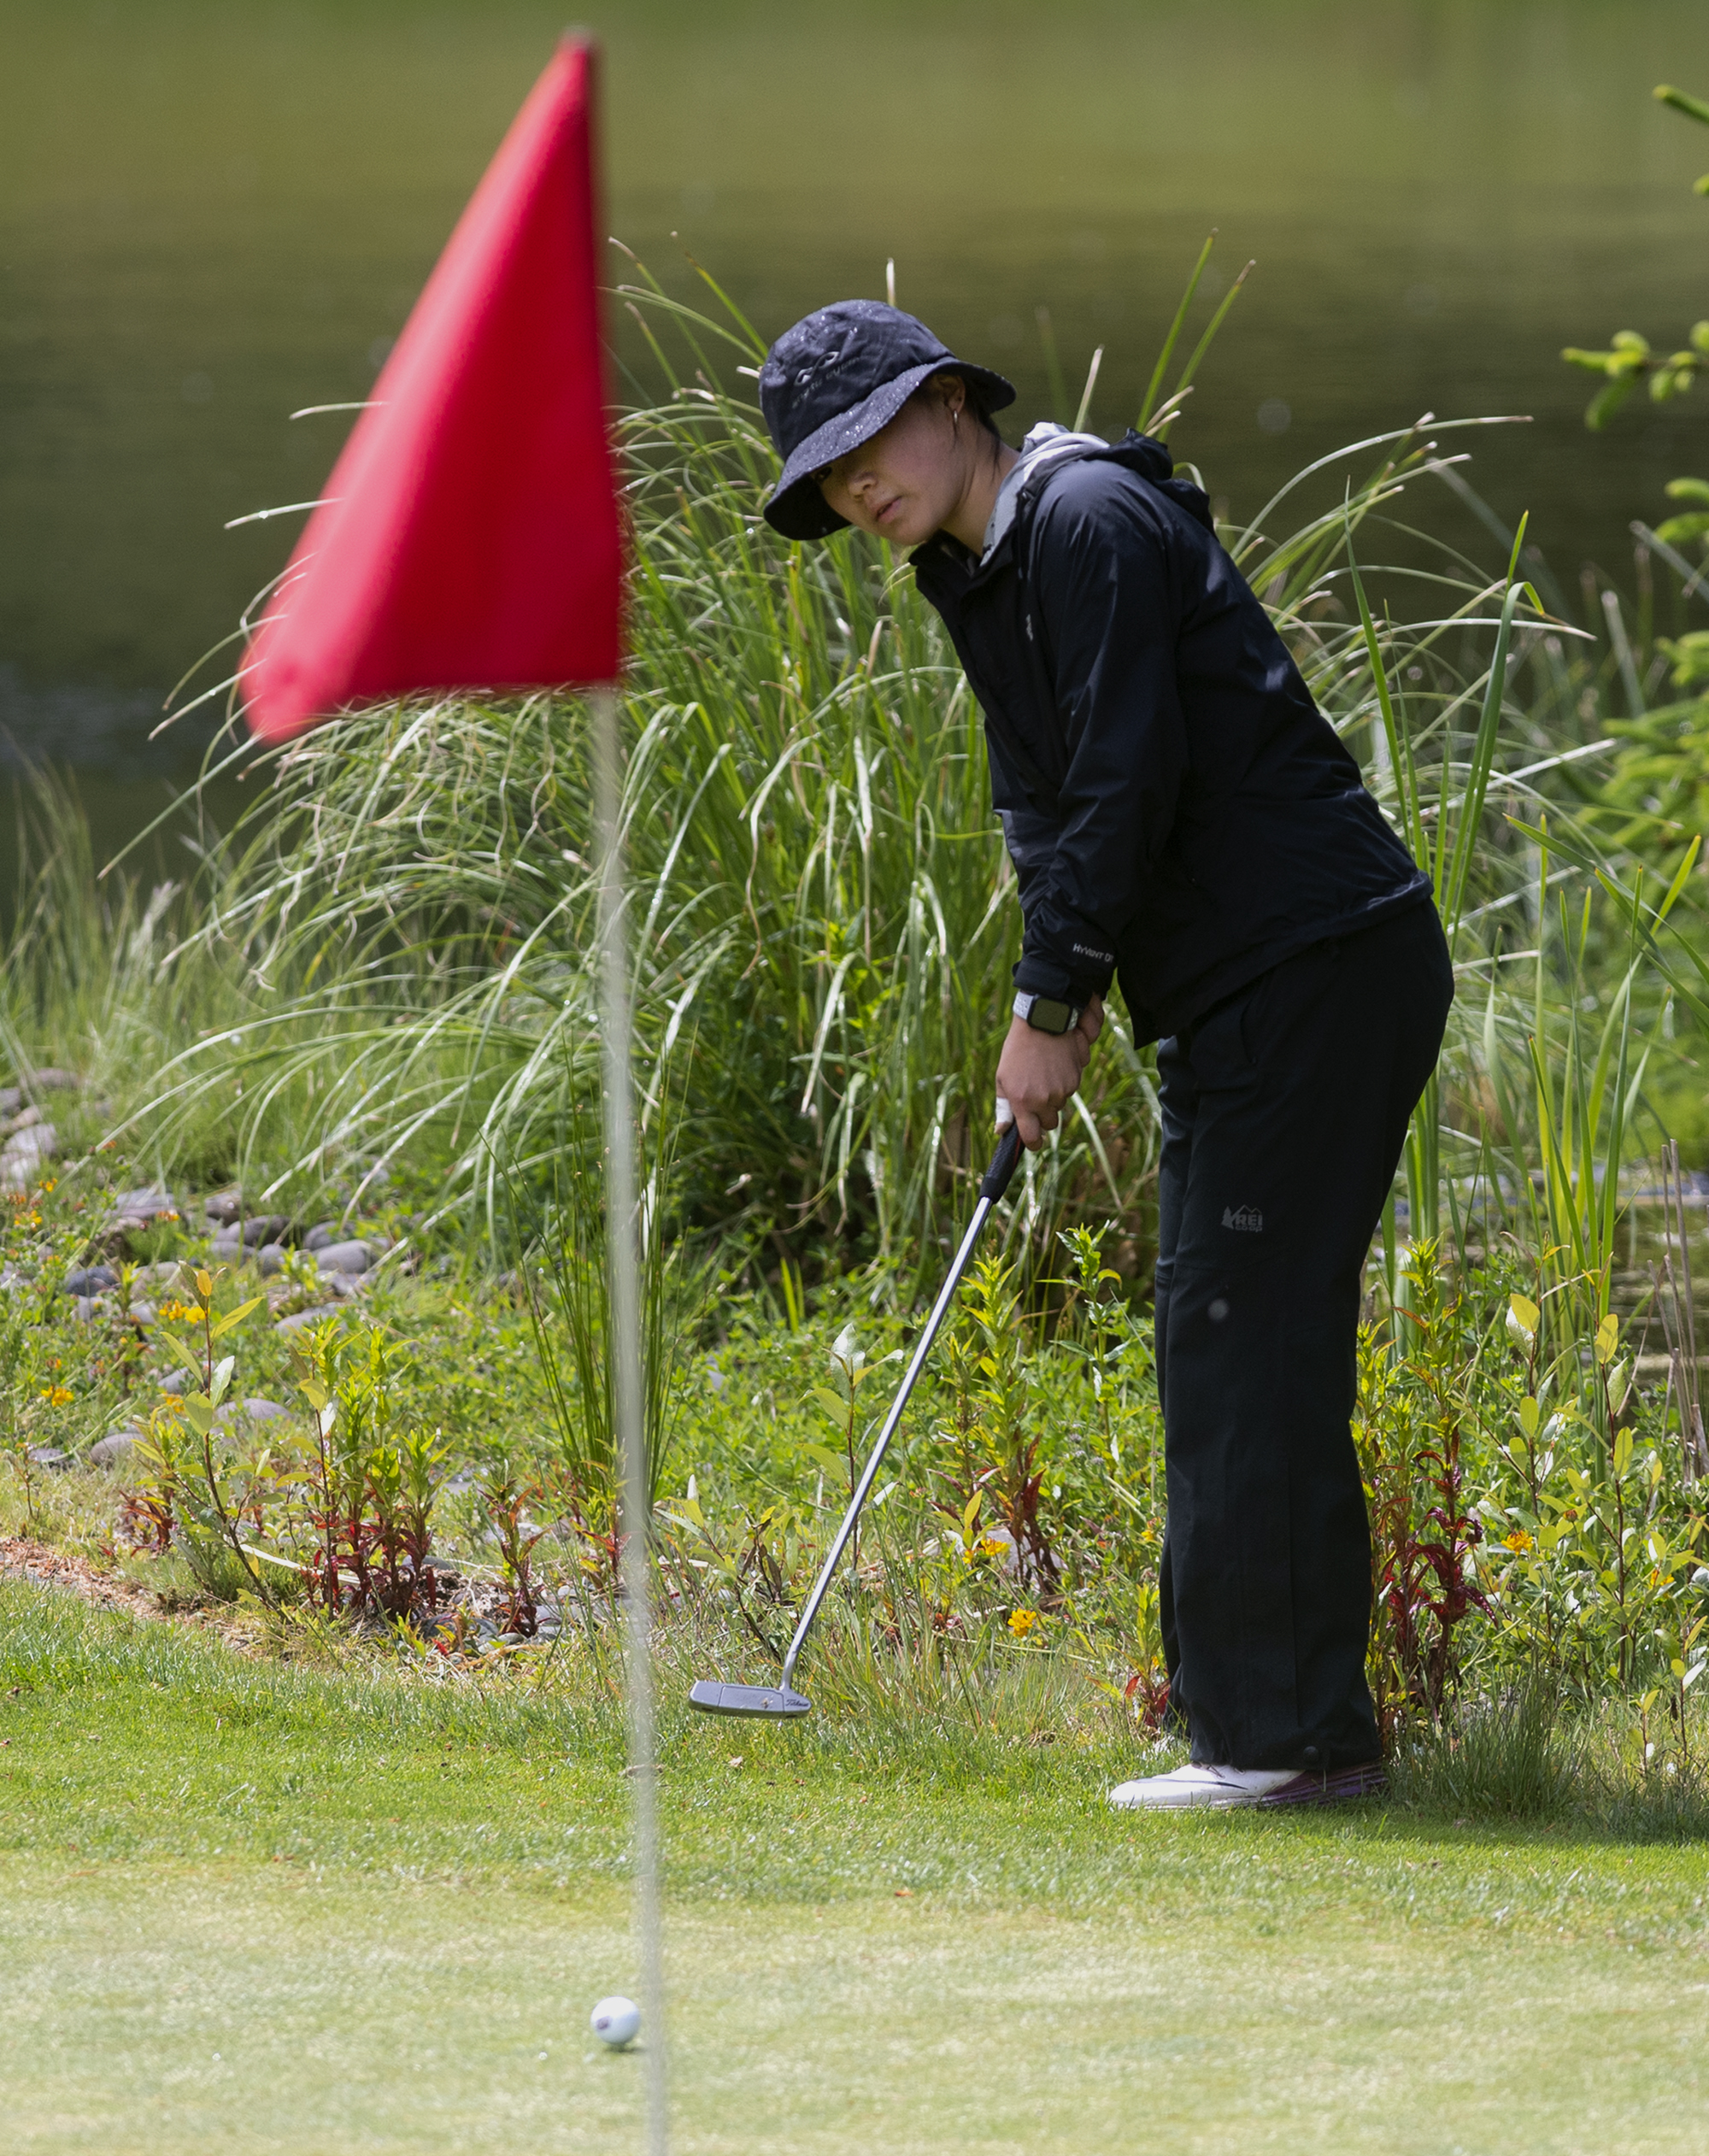 Union’s Jade Gruher putts from the fringe on the 17th hole in the 4A/3A district girls golf championships on Thursday, May 27, 2021, at Lewis River Golf Course in Woodland. Union sophomore Jade Gruher won the 4A title with a 76-77-185 total over two days. Kelso senior Liz Dolan scored a 74-80-186 to win the 3A title.